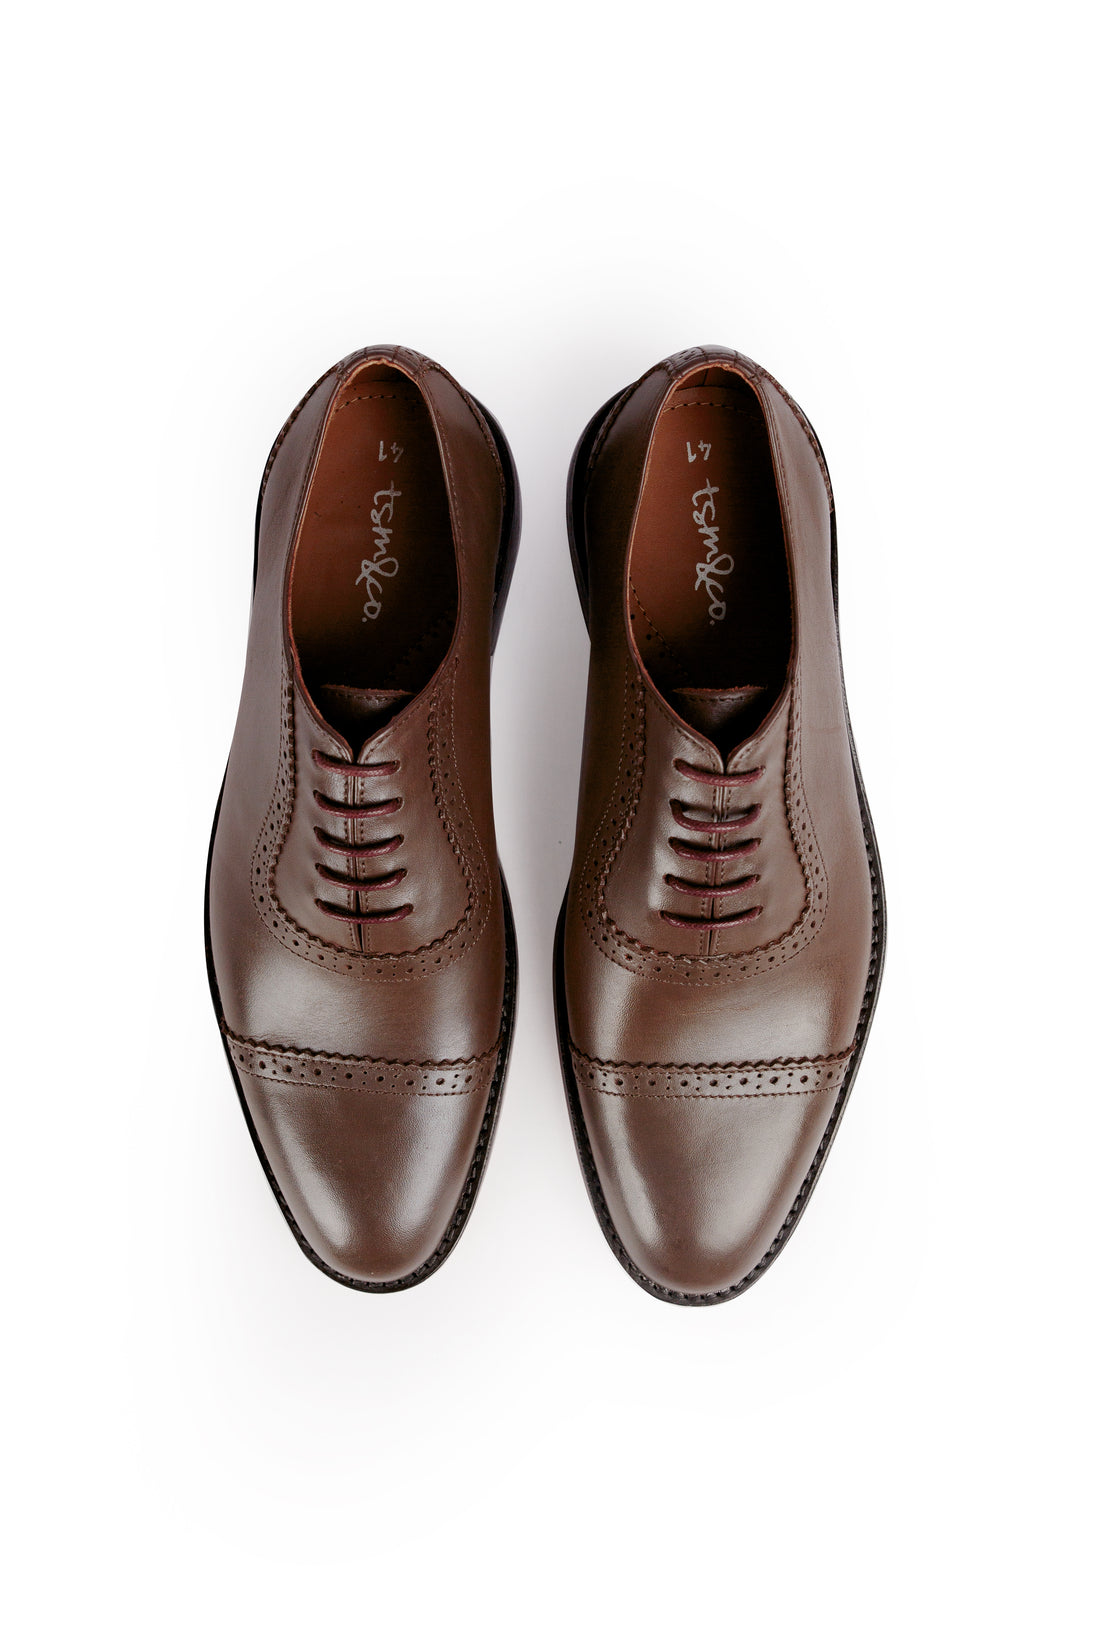 New Castle Brown – The ShoeMakers & Co.